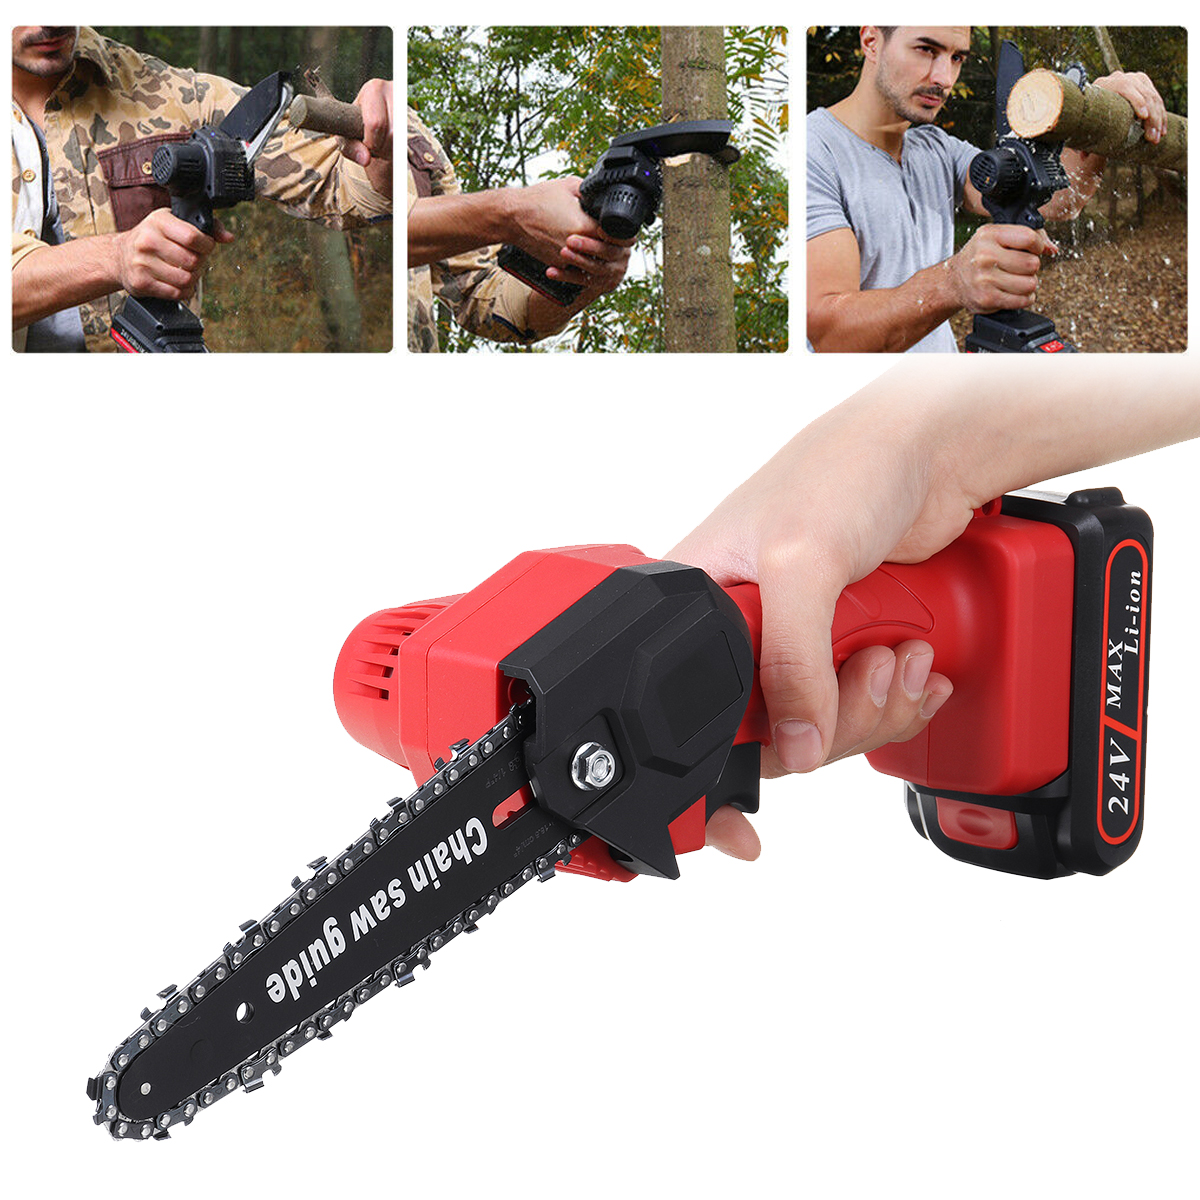 Doersupp-24V-6-Inch-Cordless-Electric-Chain-Saw-Wood-Cutter-550W-One-Hand-Saws-Woodworking-Machine-W-1797390-9